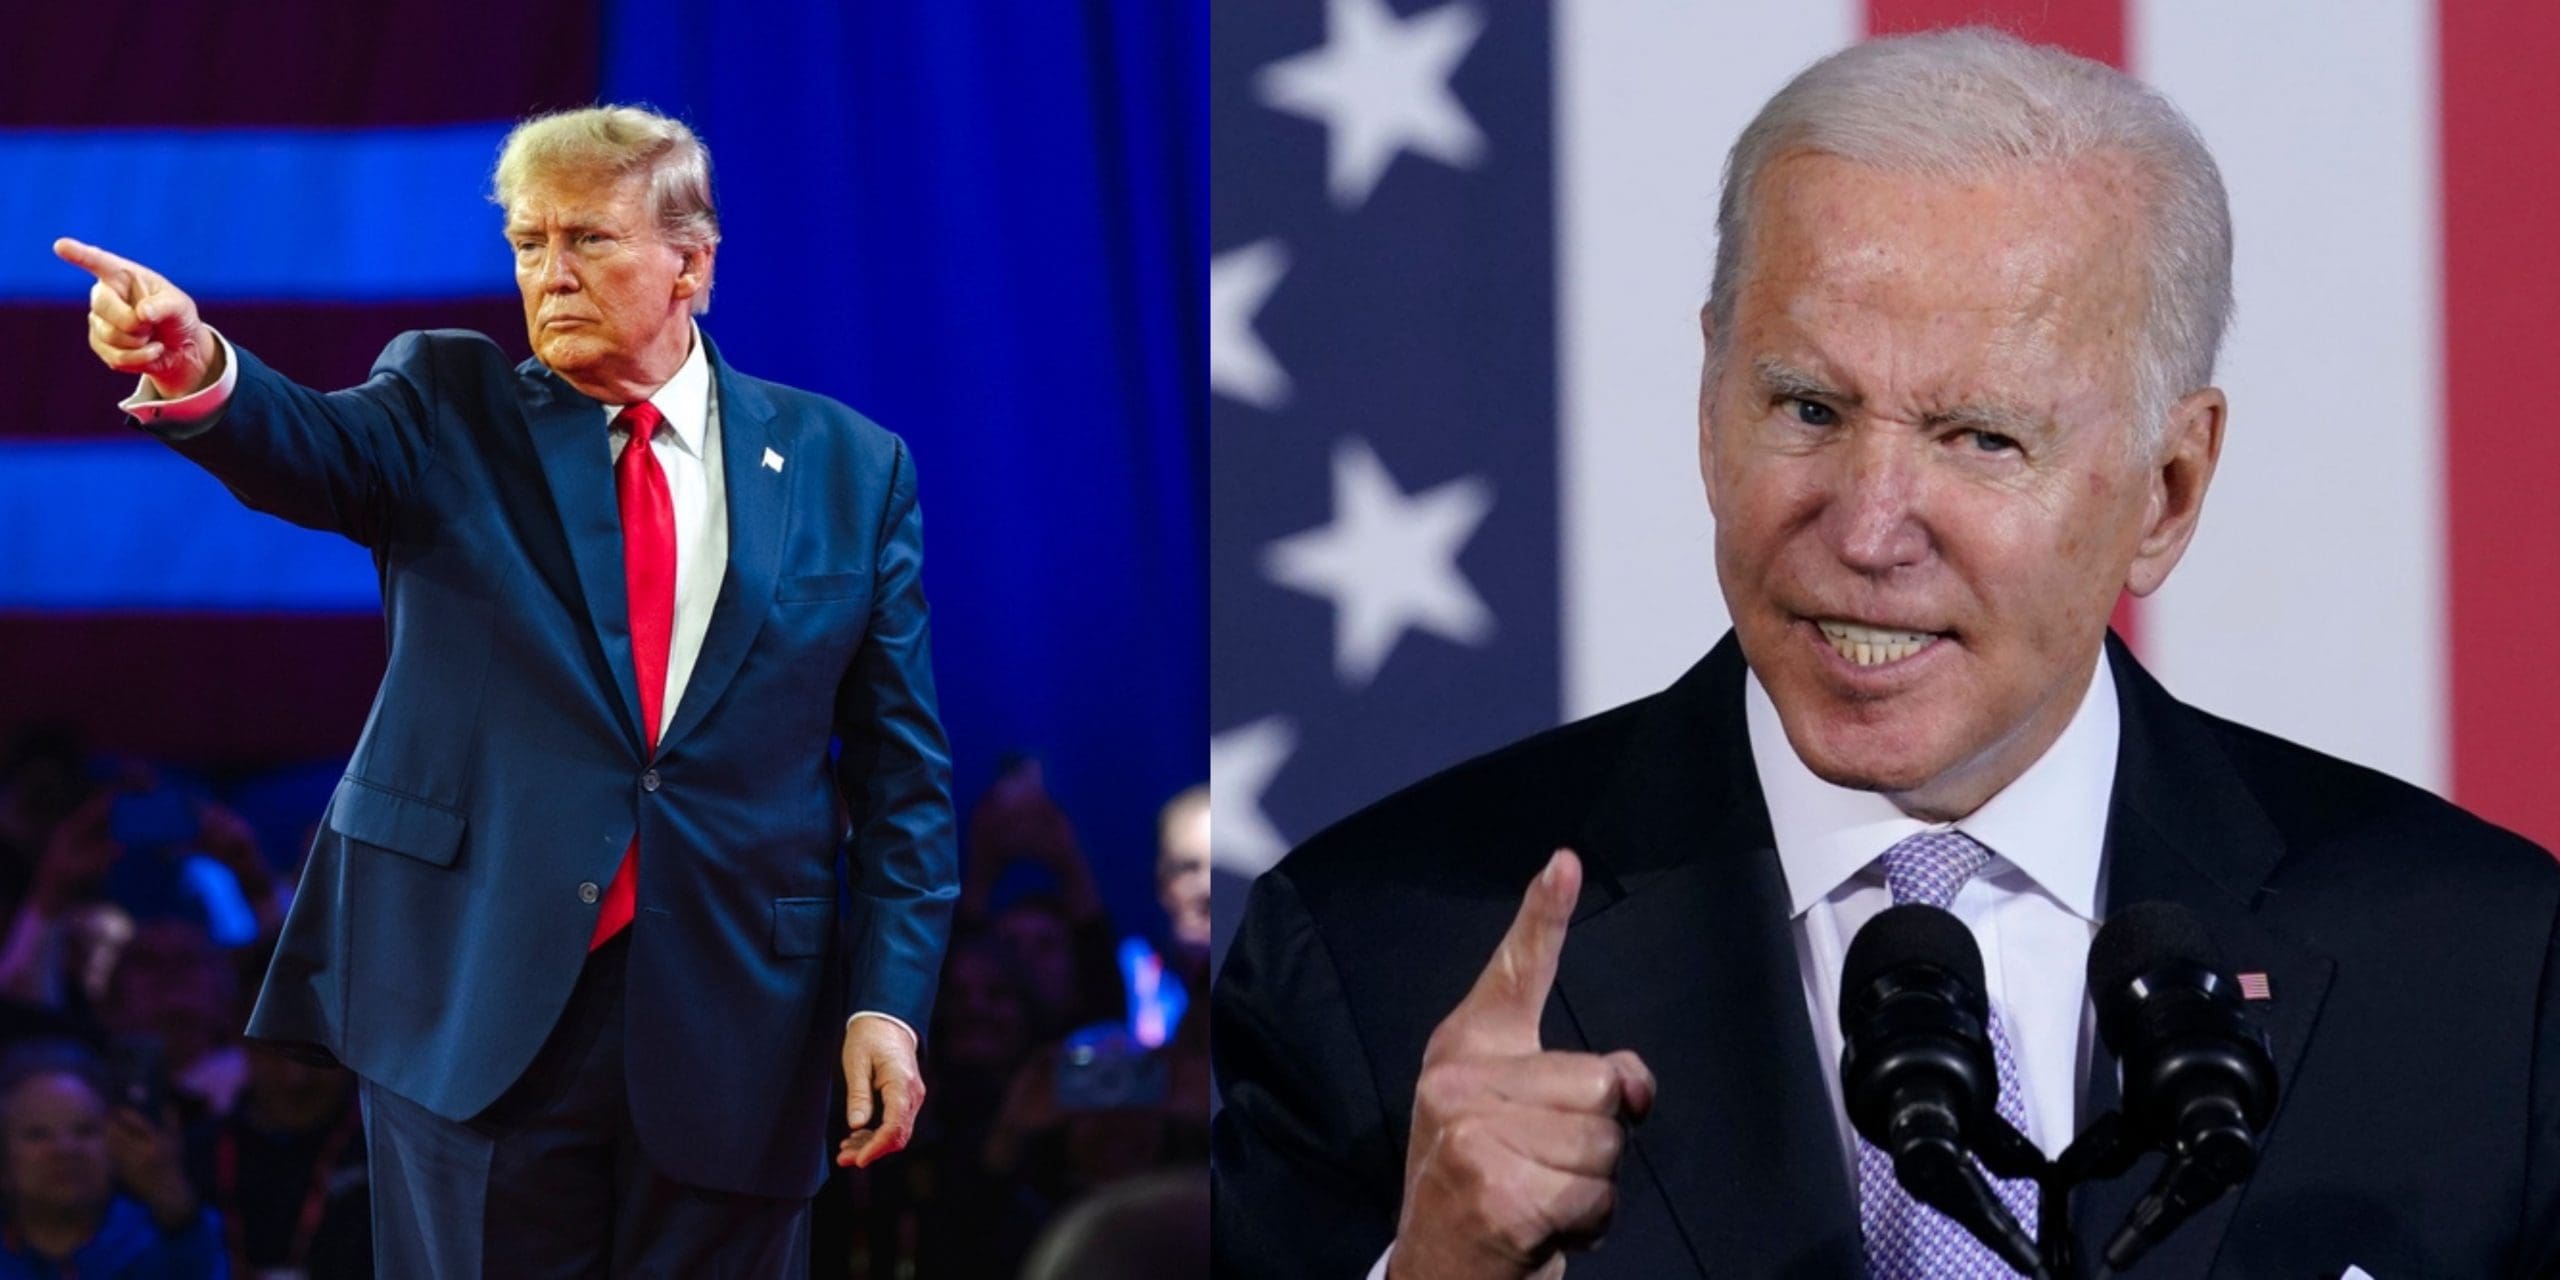 Trump And Biden Spent Nearly 2 Minutes Arguing About Golf During The Debate Last Night